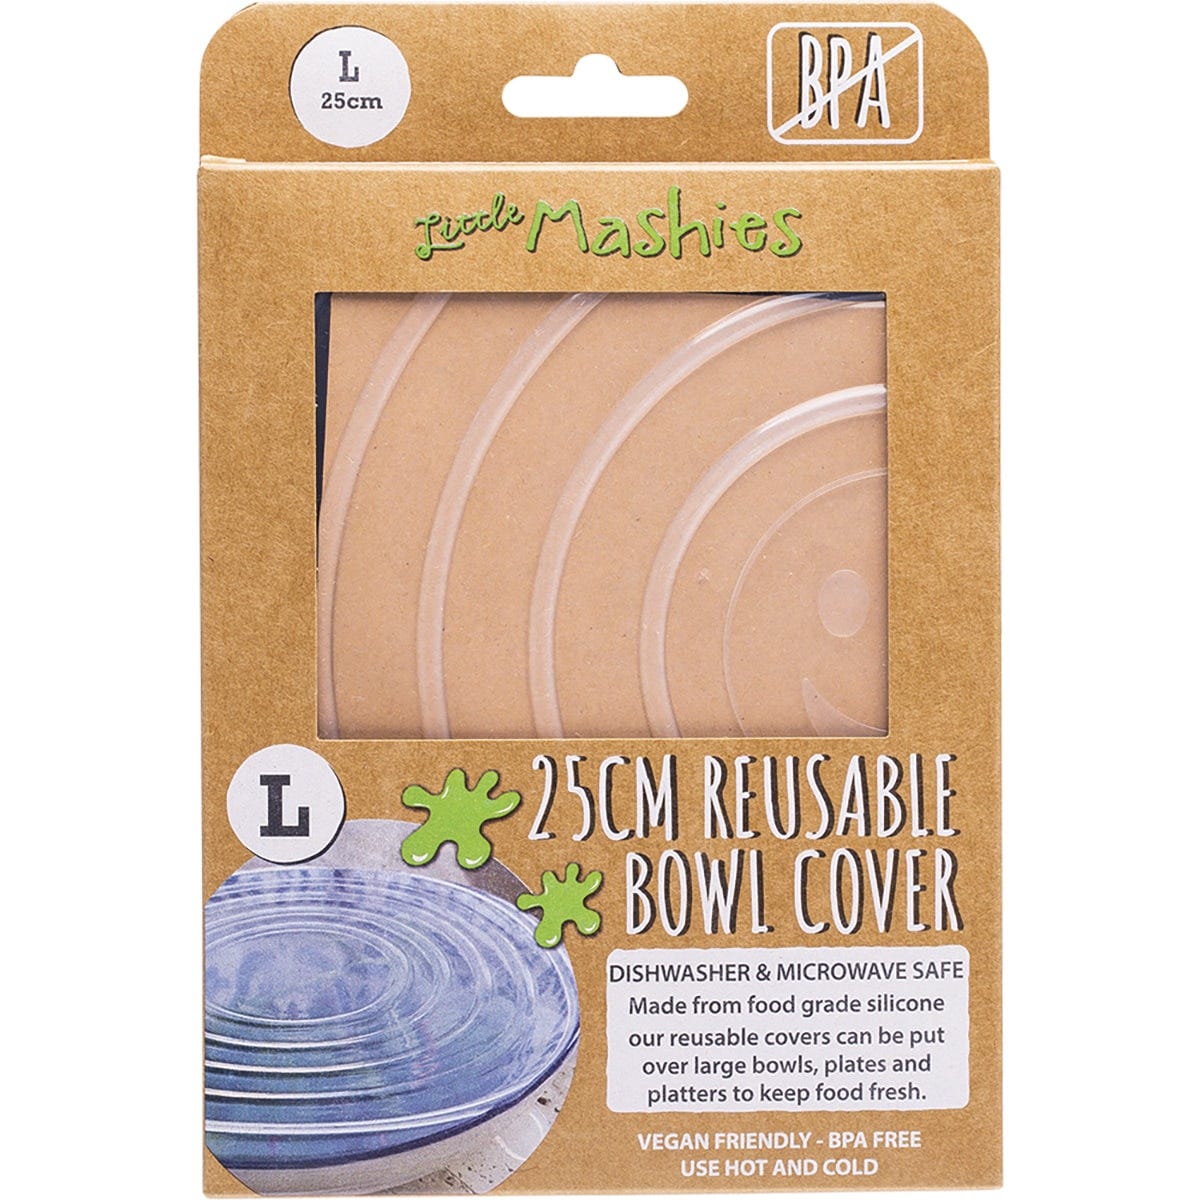 Little Mashies Reusable Bowl Cover Large 25cm - Dr Earth - Food Wraps & Covers